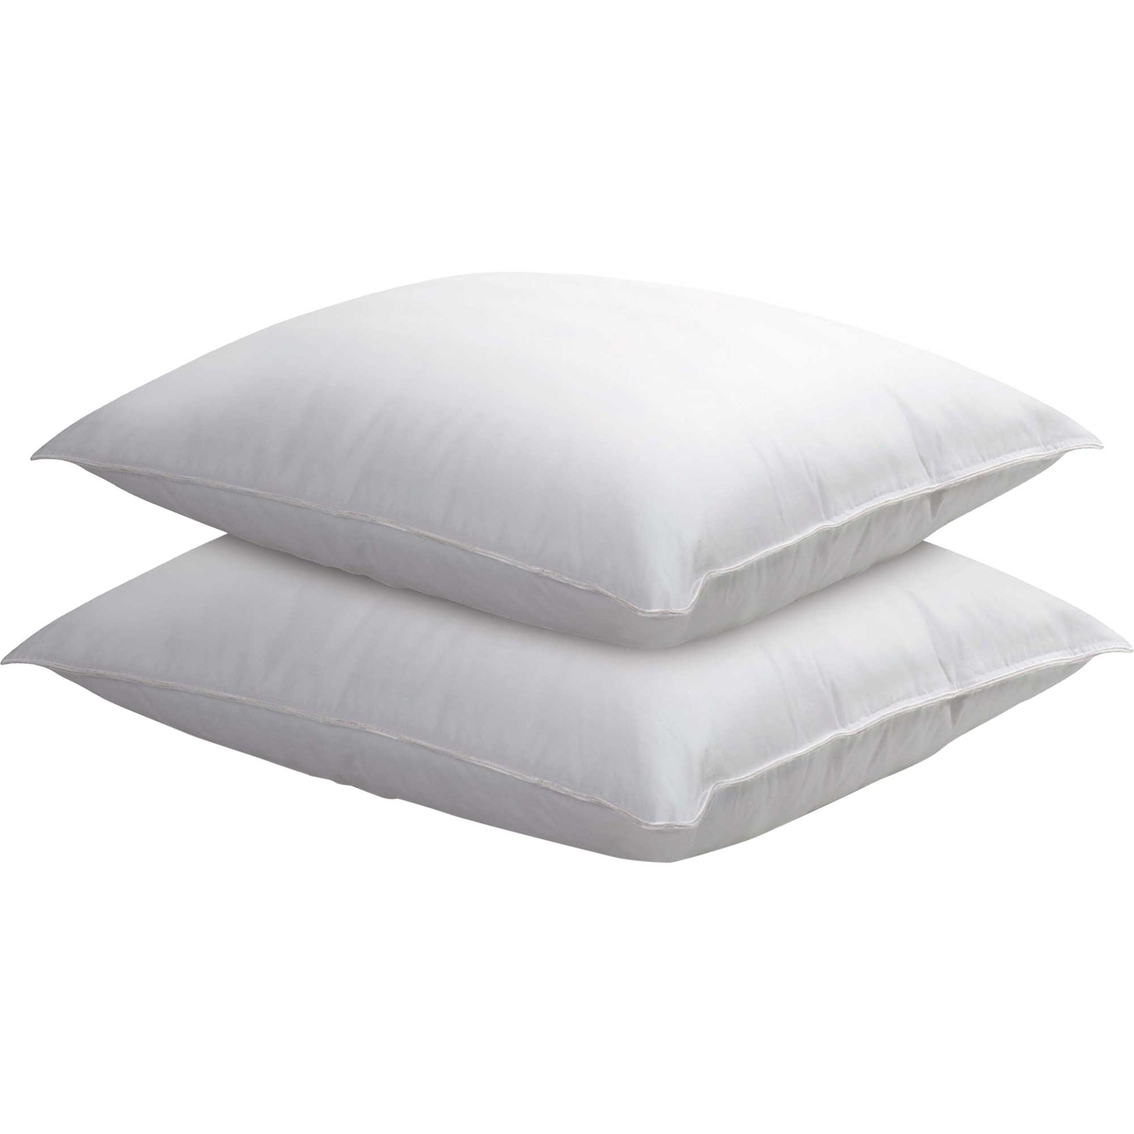 Rio Home Fashions Permaloft Never Goes Flat Gel Pillow Bed